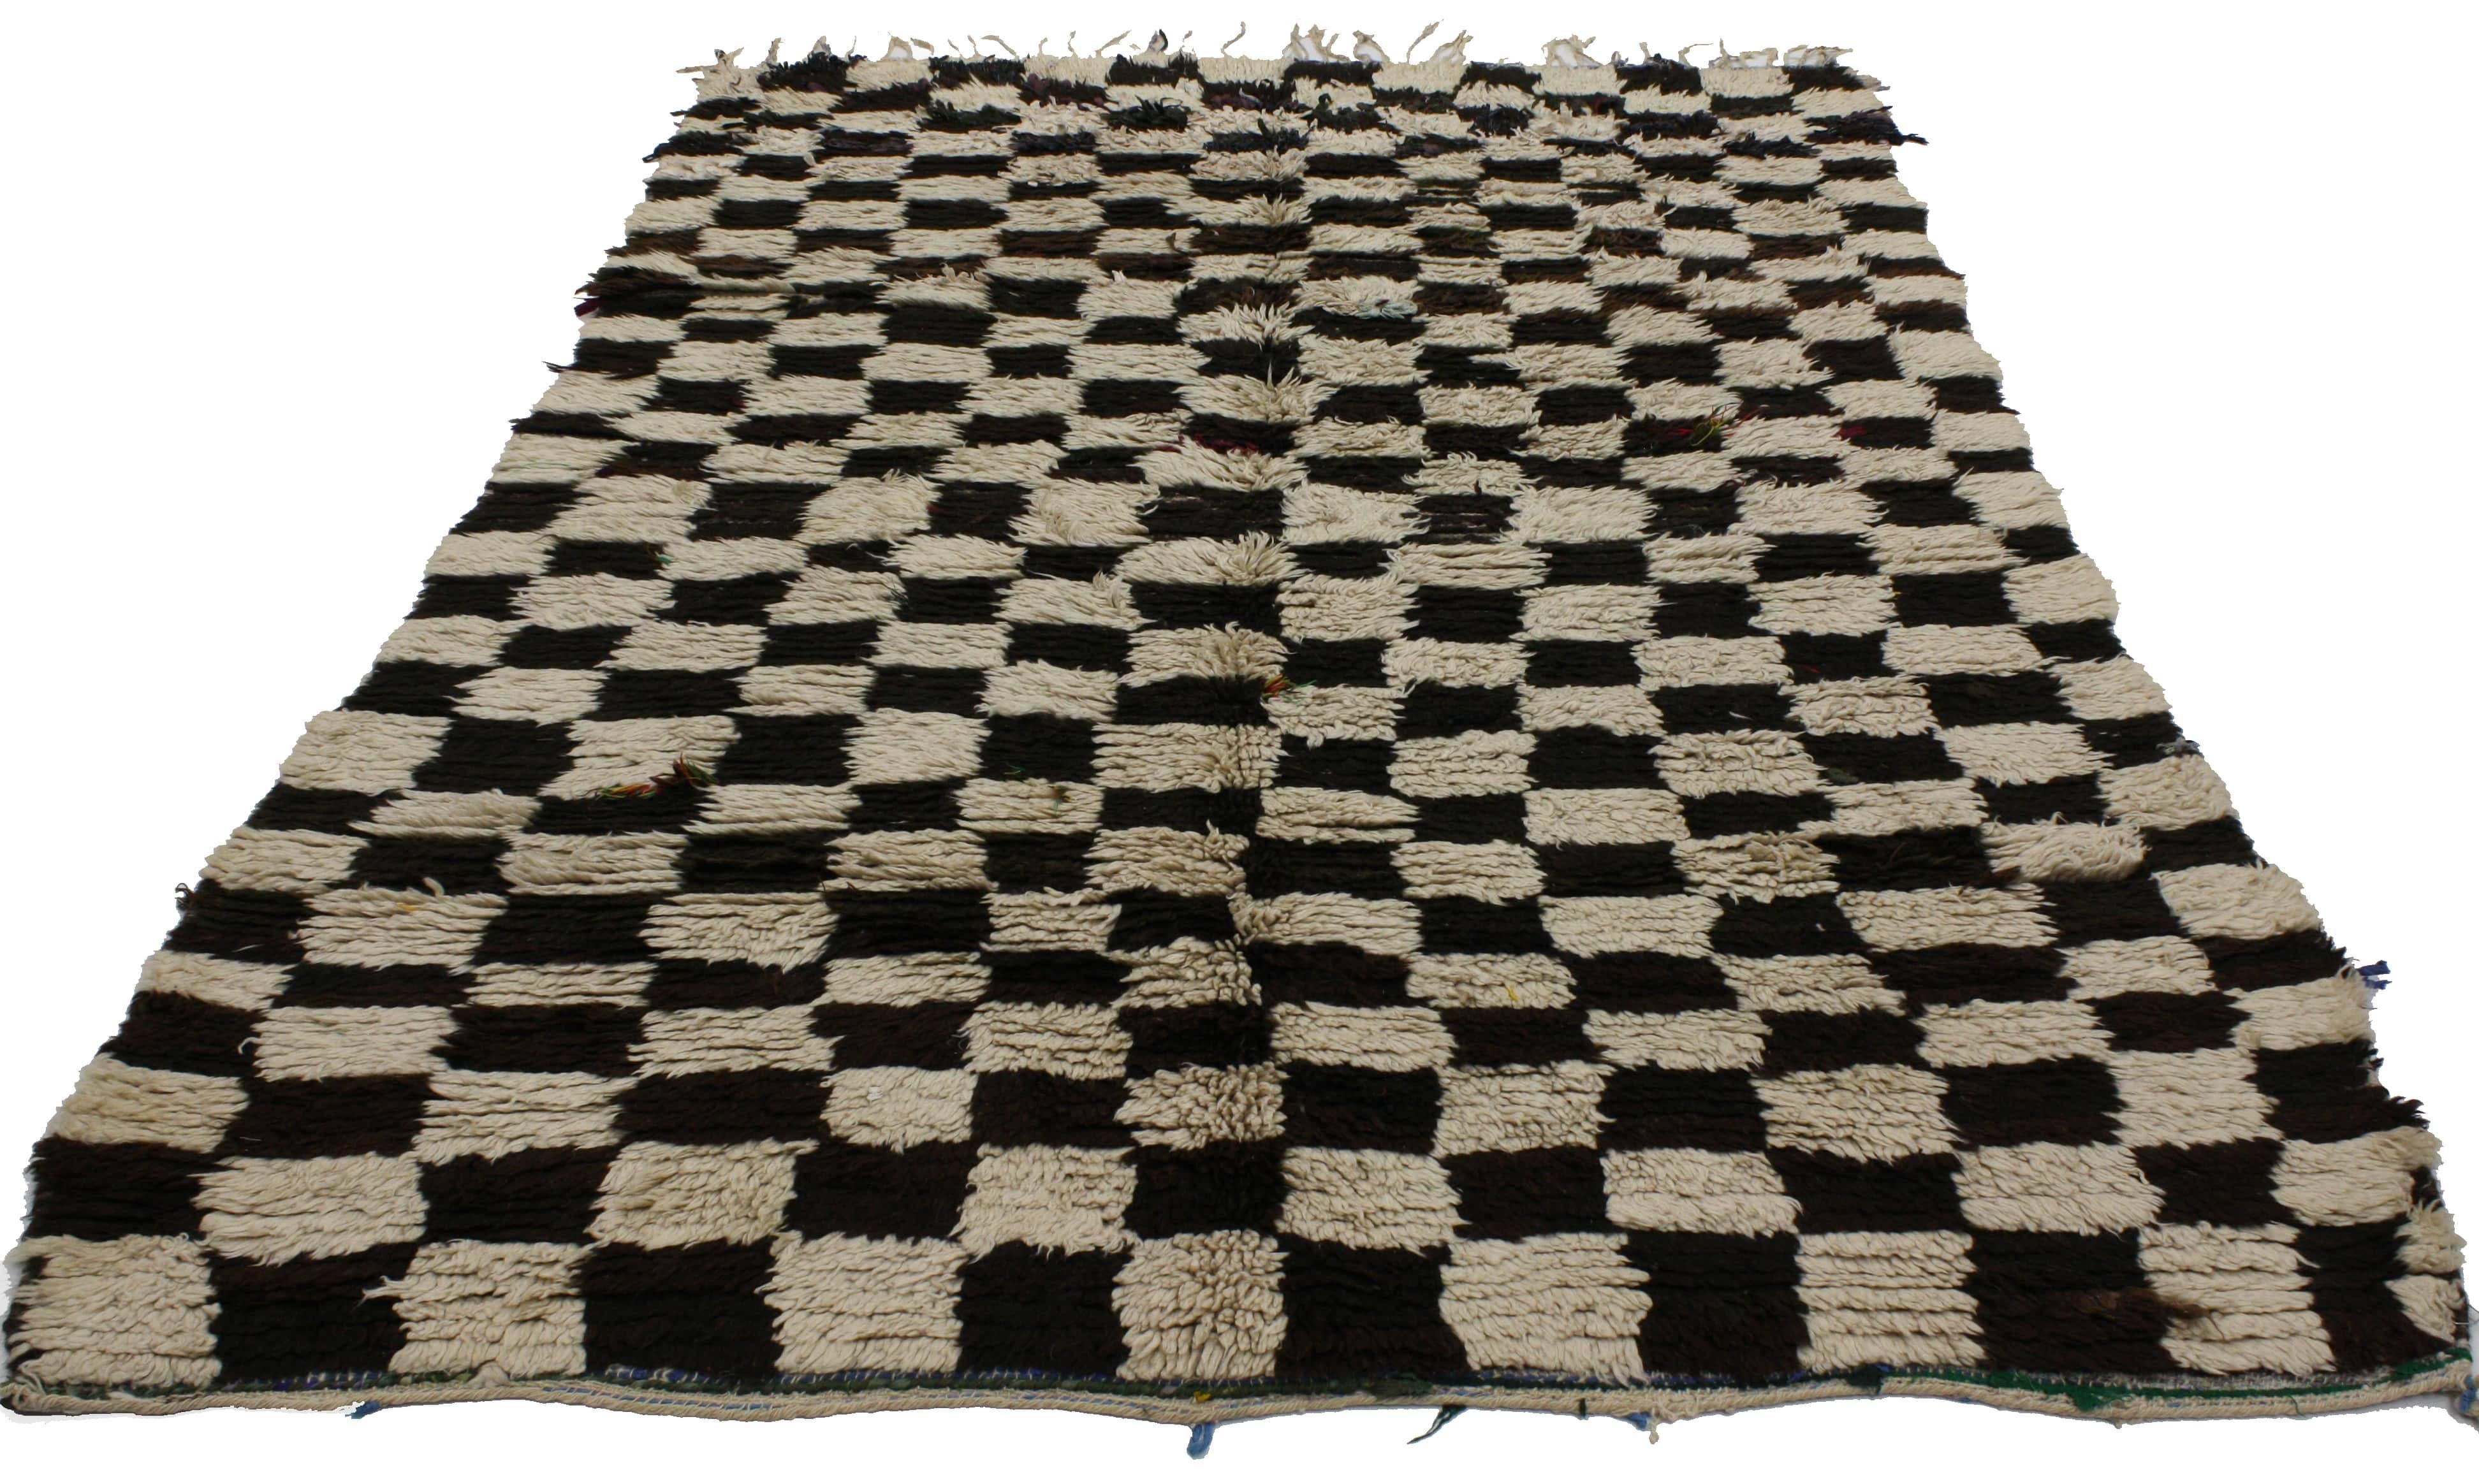 20064 vintage Berber Moroccan rug. This vintage Berber Moroccan rug is wonderfully unique, coming from the Berber Tribes of Morocco. Featuring an all-over lozenge checkerboard pattern rendered in neutral shades of black and beige, this Berber